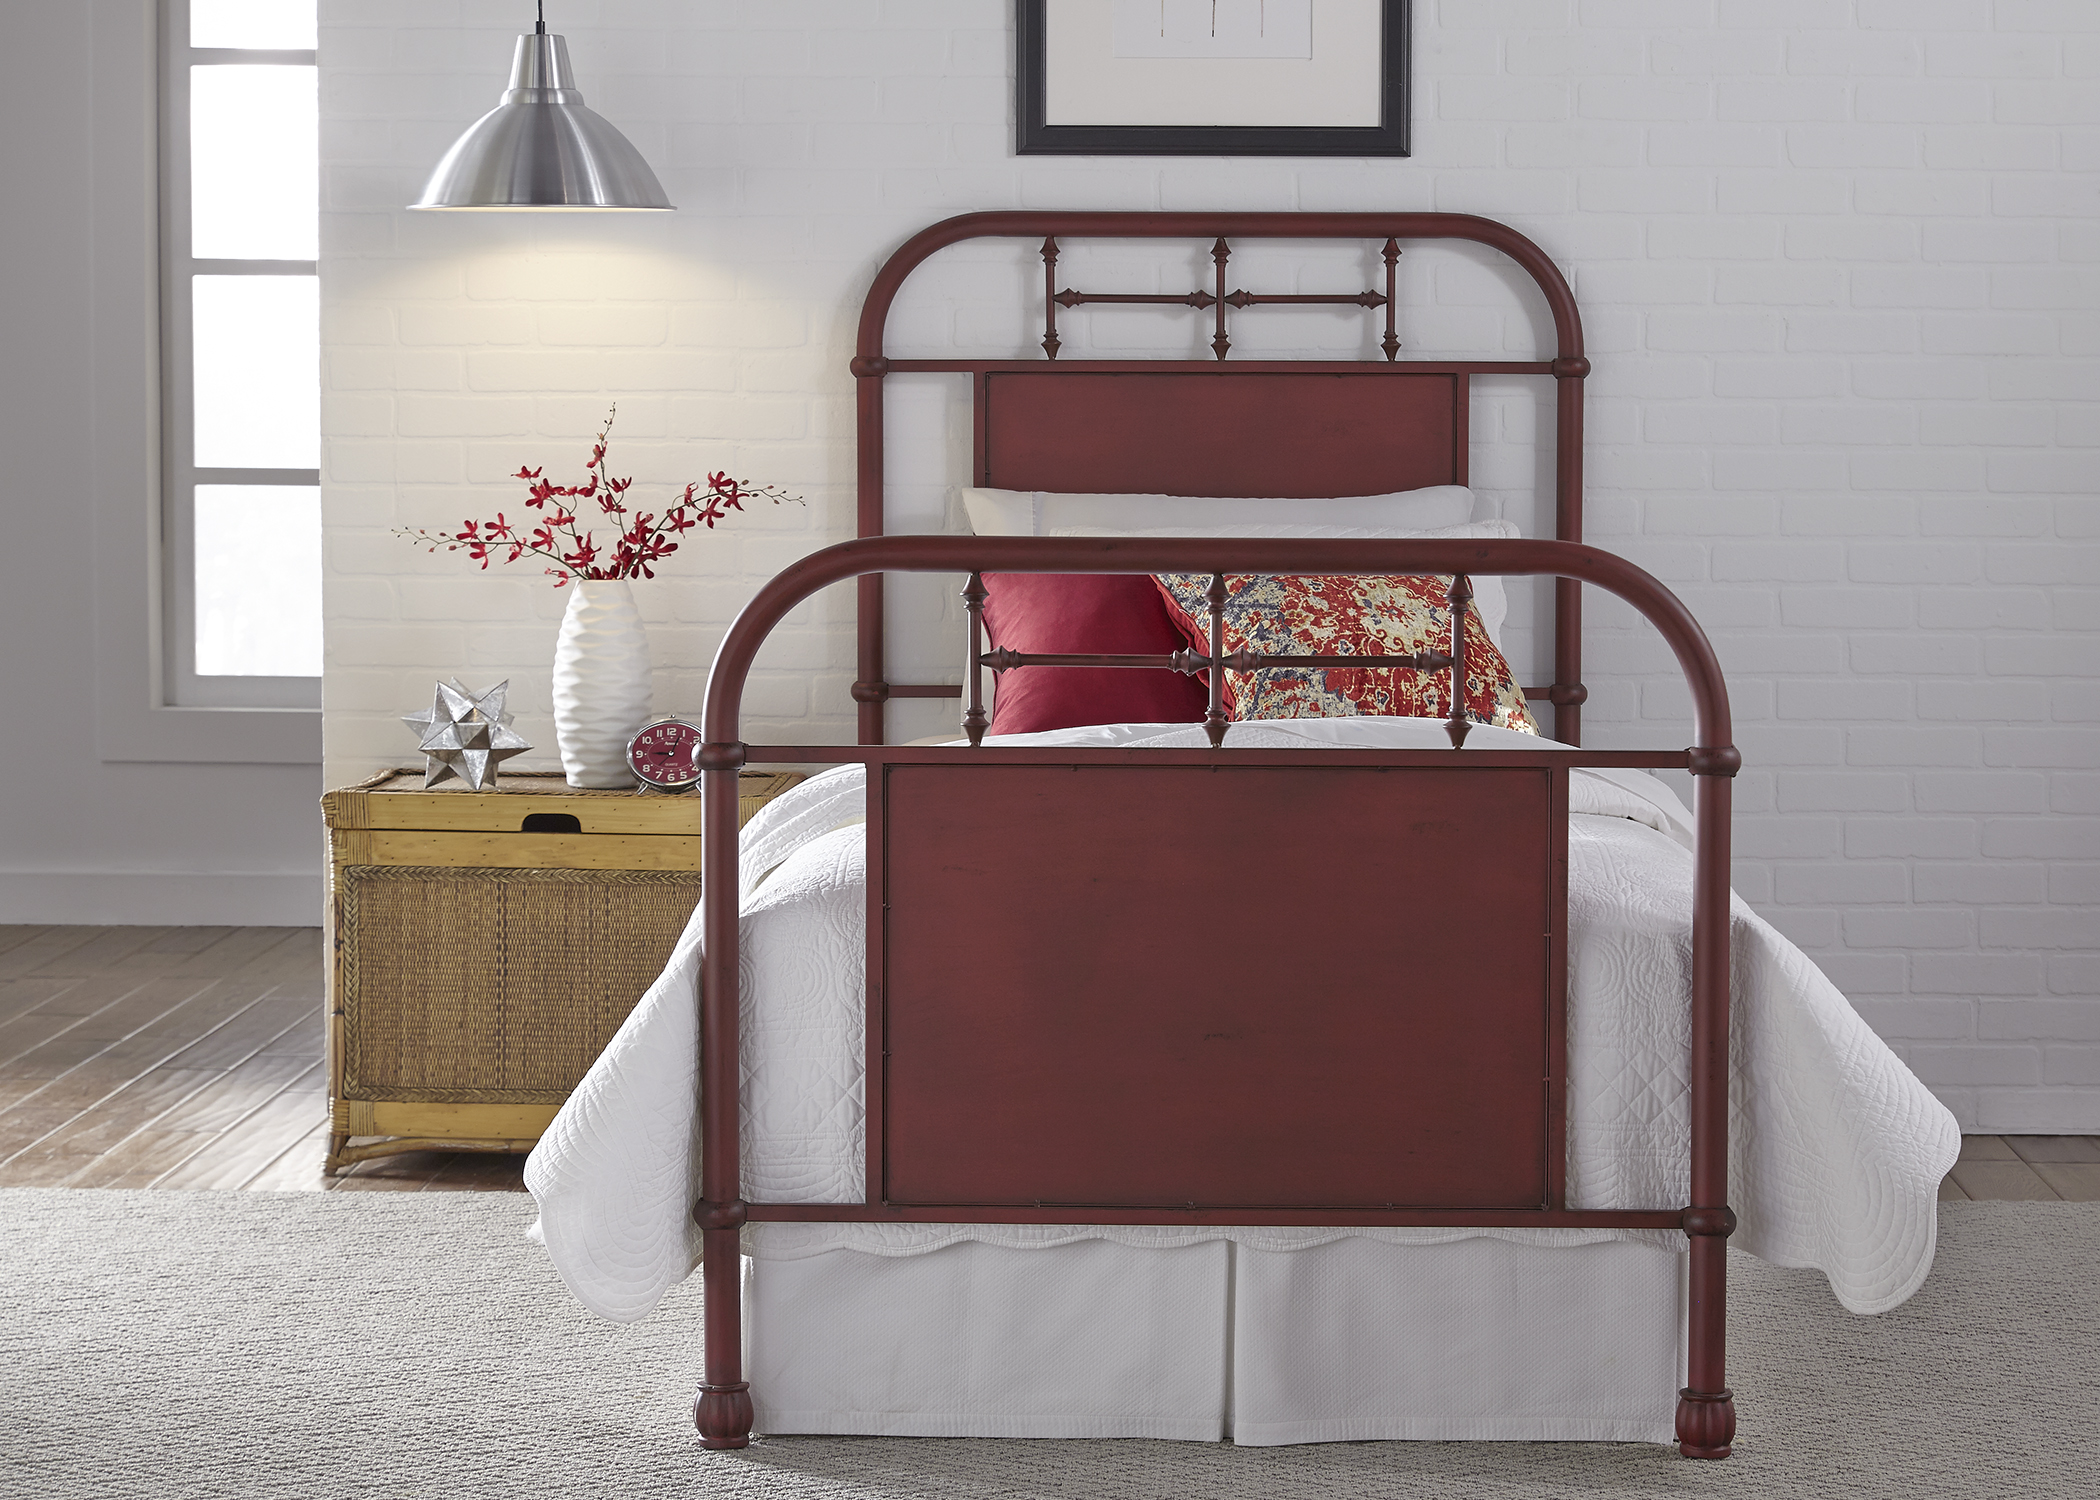 Liberty Vintage Red Youth Bedroom Twin Metal Bed